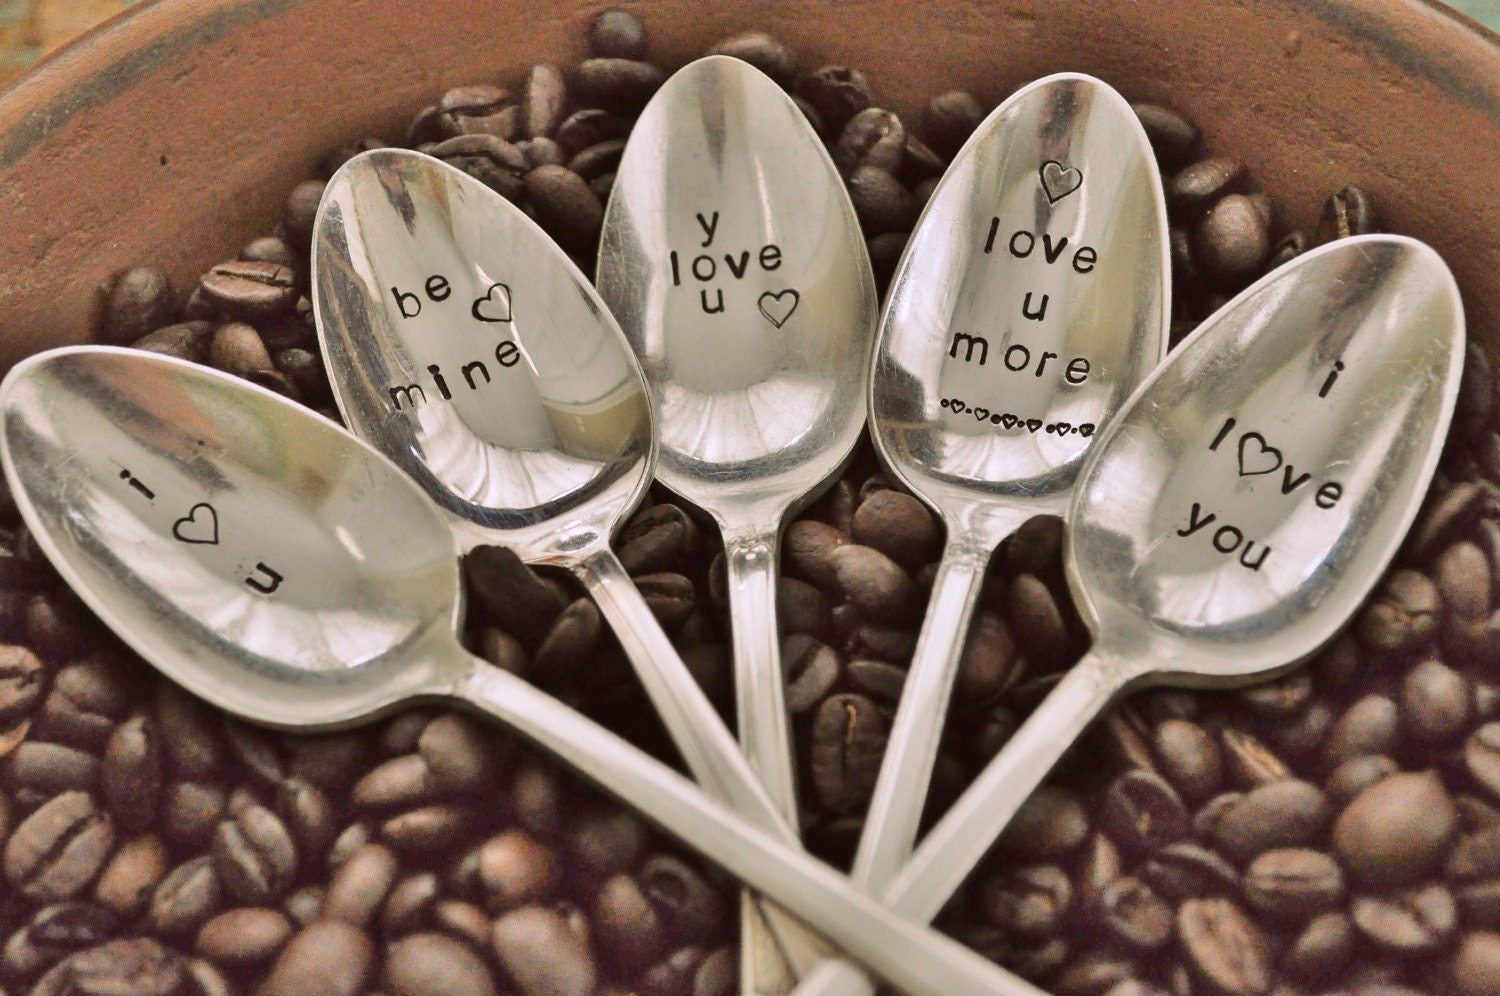 Personalized valentines spoons in coffee bean bowl